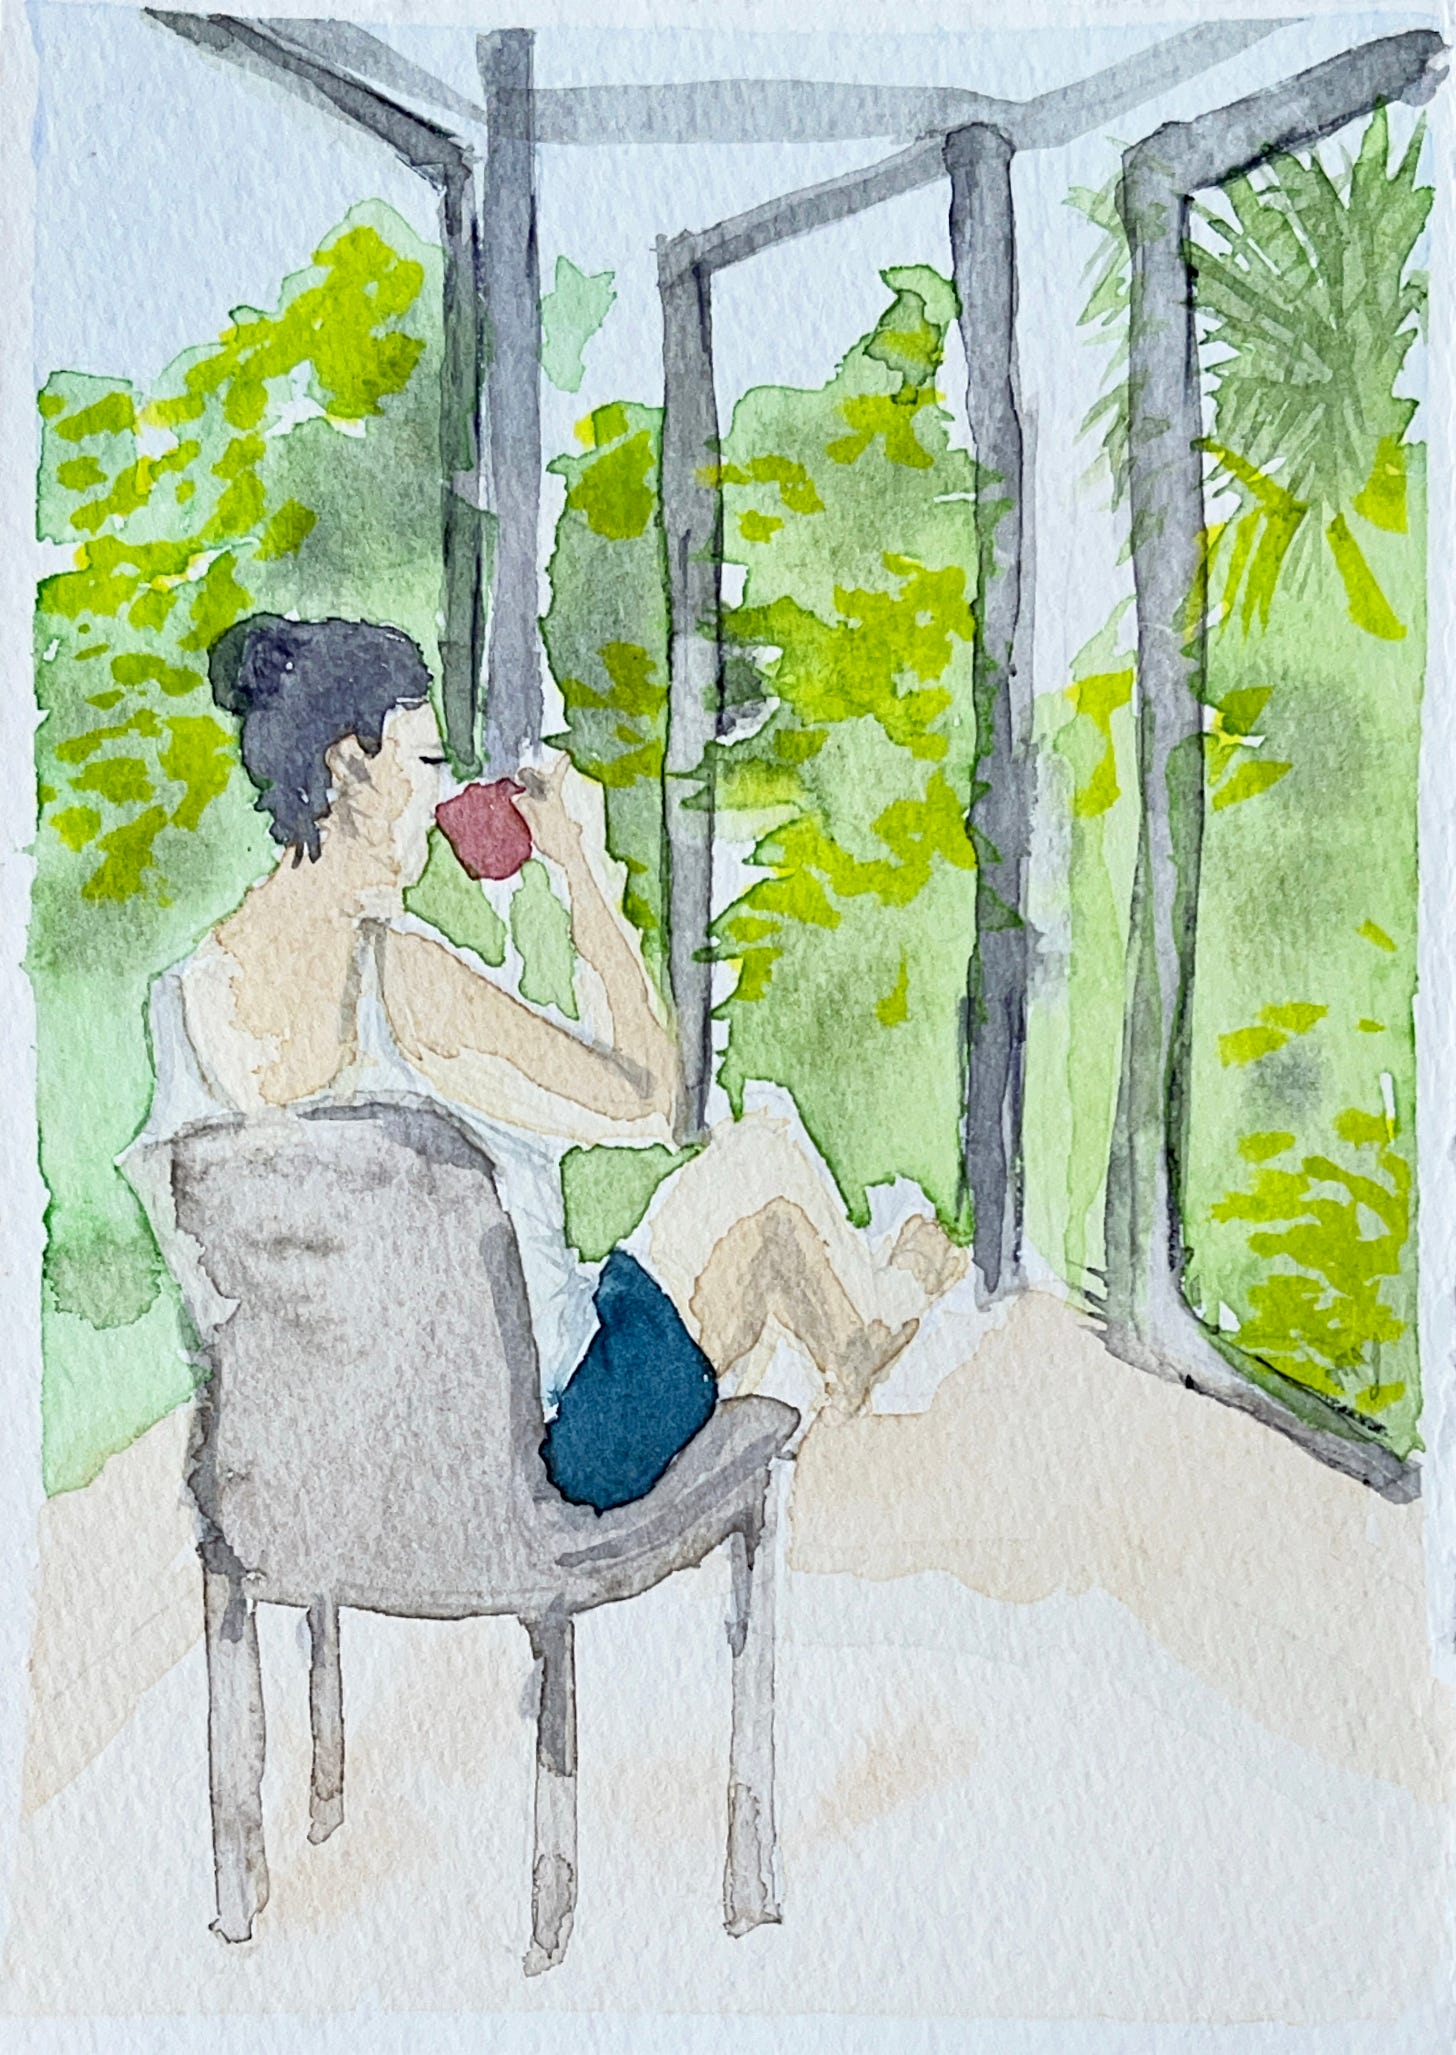 Image: A watercolour painting of a lady with her hair tied loosely in a bun, drinking a cup of coffee. She’s seated in front of the windows, her legs casually propped up on the window sill, and seemingly lost in thoughts as she gazed at the trees outside, which surrounded all the three big, windows.